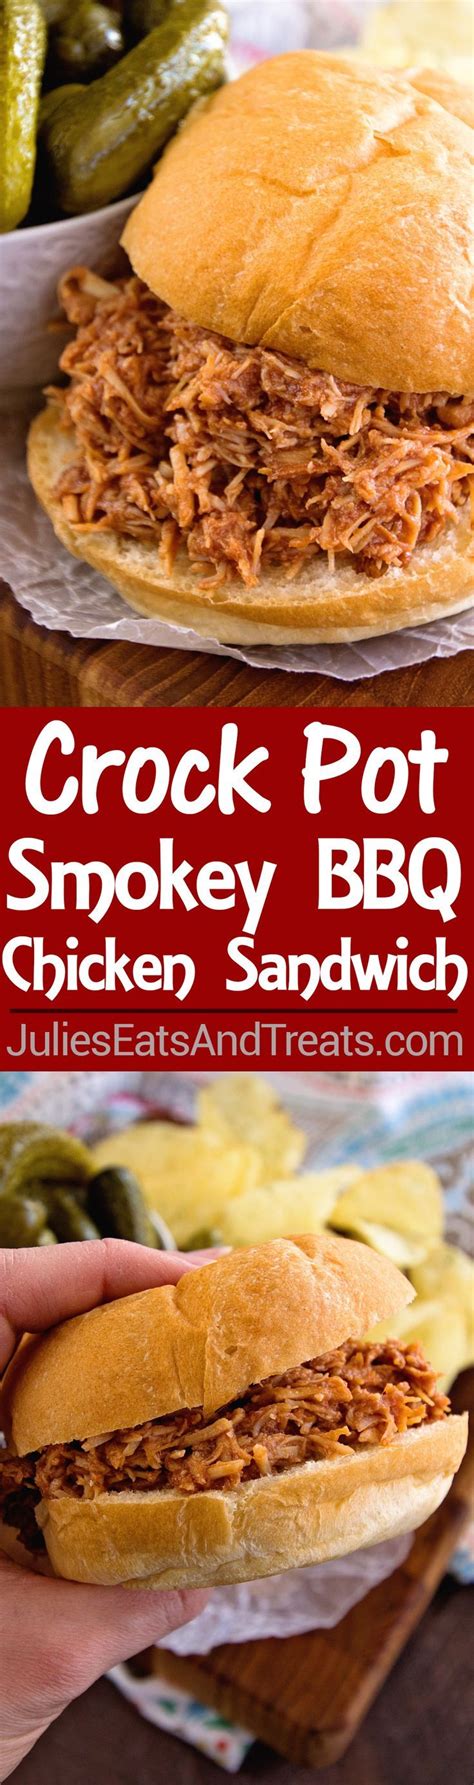 Mix all ingredients together and heat in saucepan or crock pot. Easy, Shredded Chicken Sandwiches in Your Slow Cooker ...